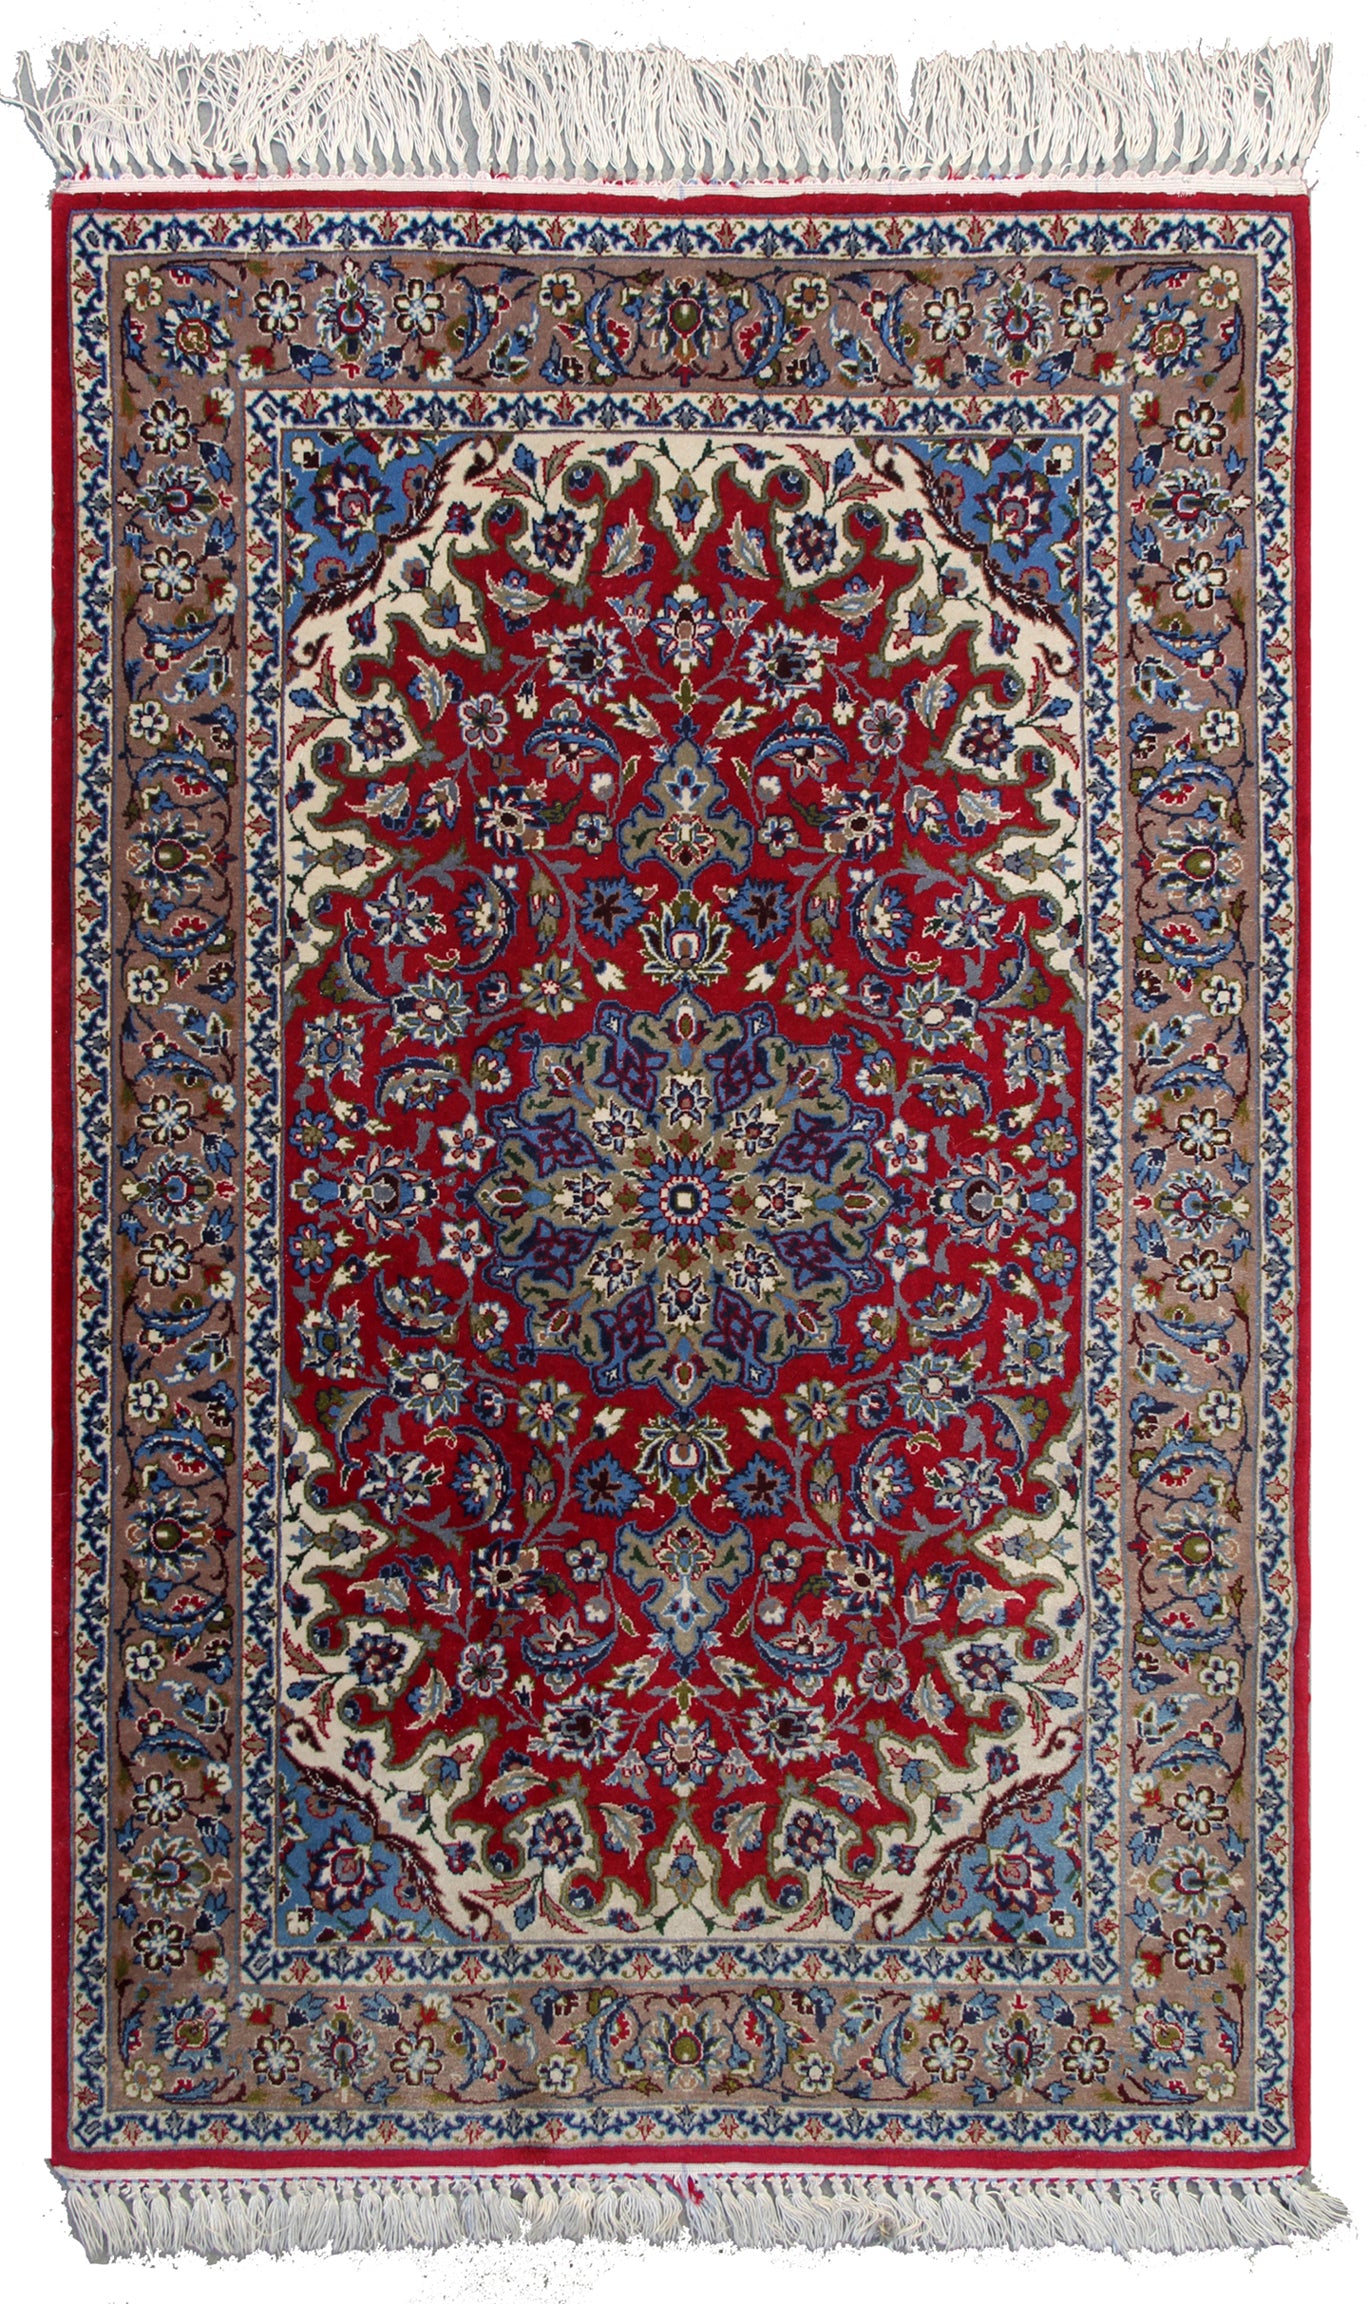 4' x3' Persian Traditional Rug